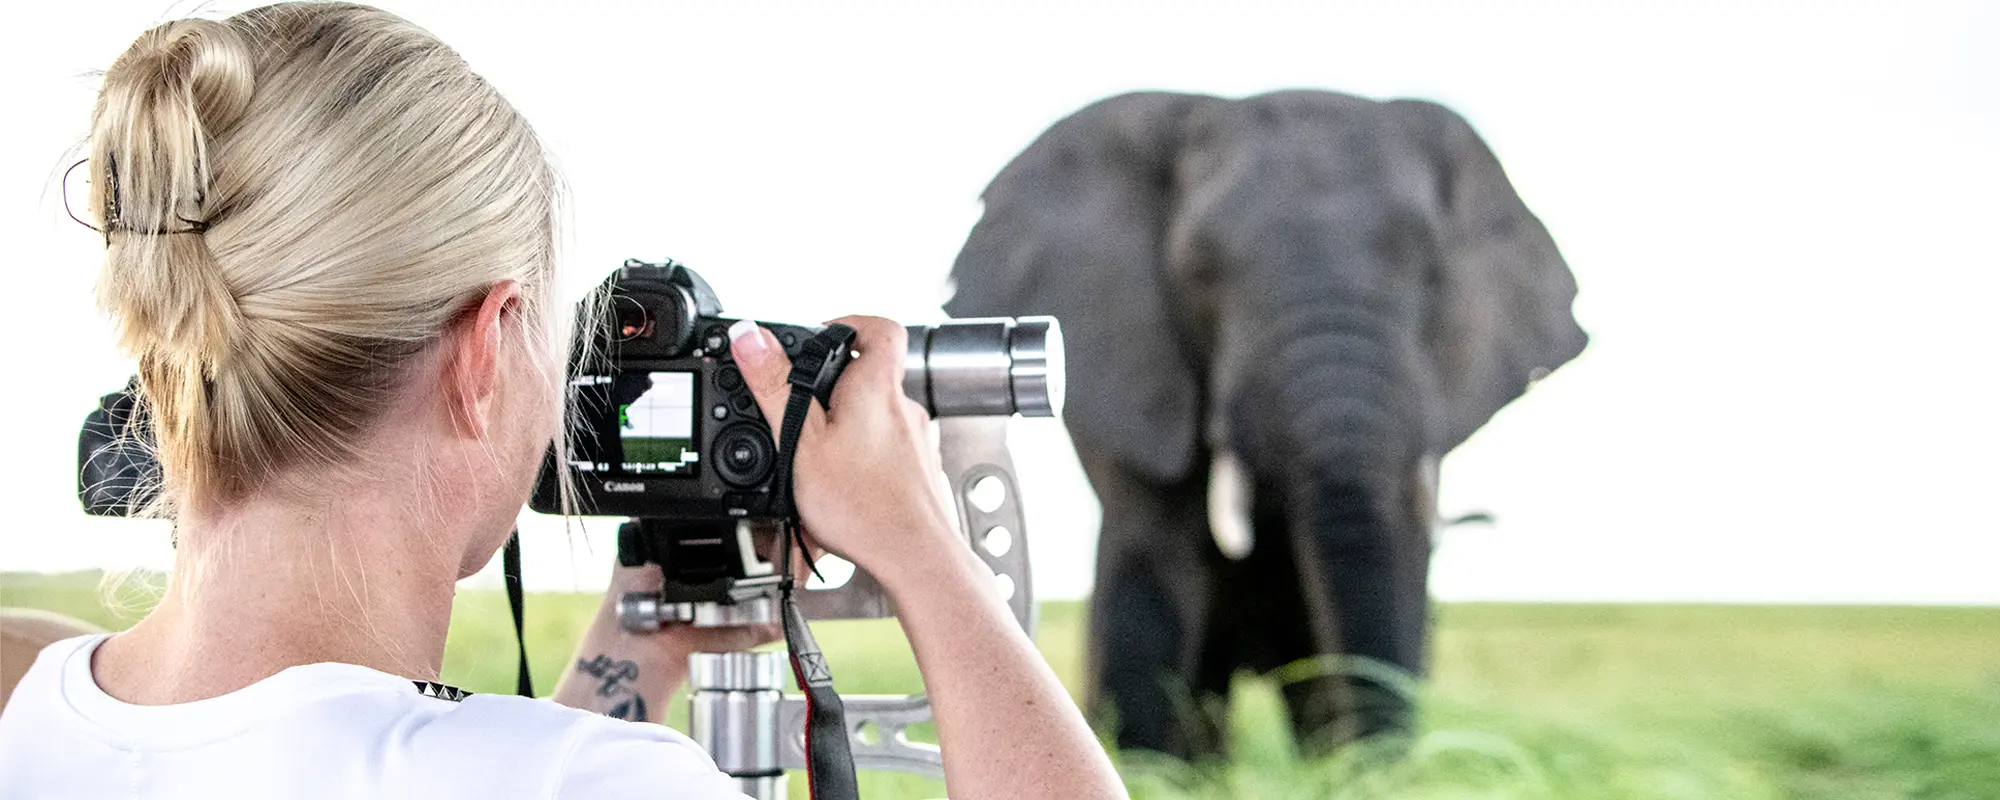 photographing elephants in the Chobe